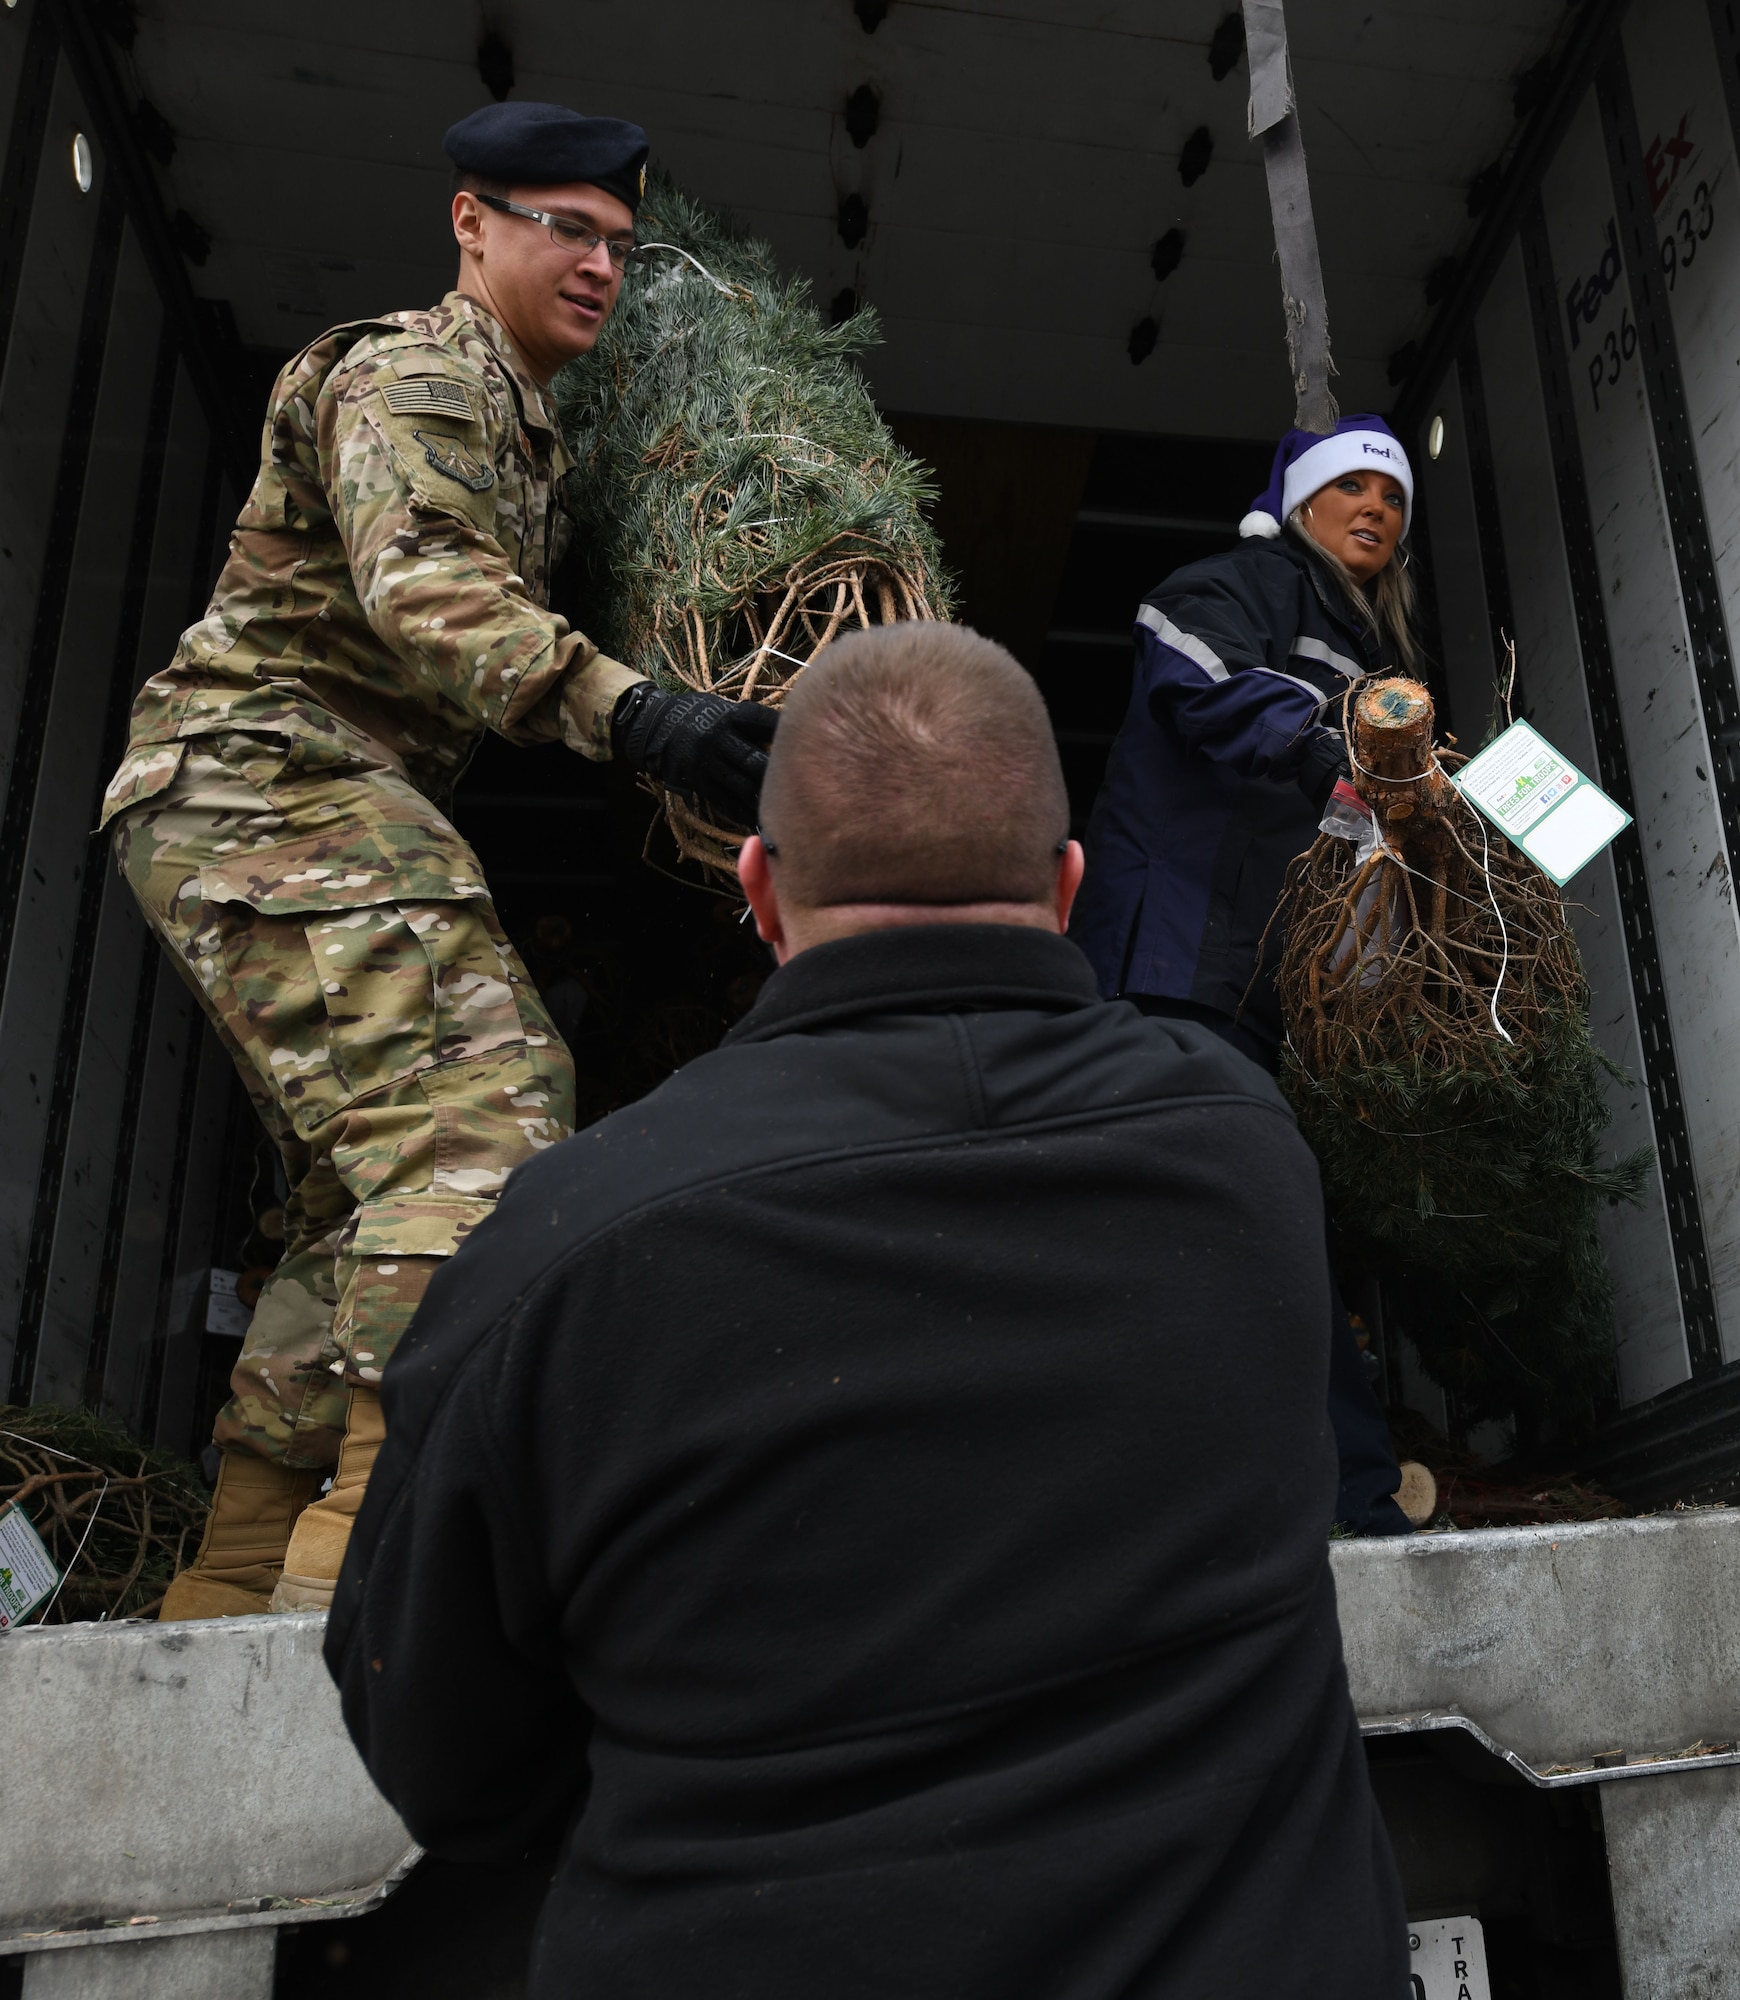 Volunteers help unload trees at Ellsworth Air Force Base, S.D., Nov. 30, 2018. Trees for Troops is an event where community members all over the country donate trees to service members so they can have a free tree for the holidays. (U.S. Air Force photo by Airman 1st Class Thomas Karol)